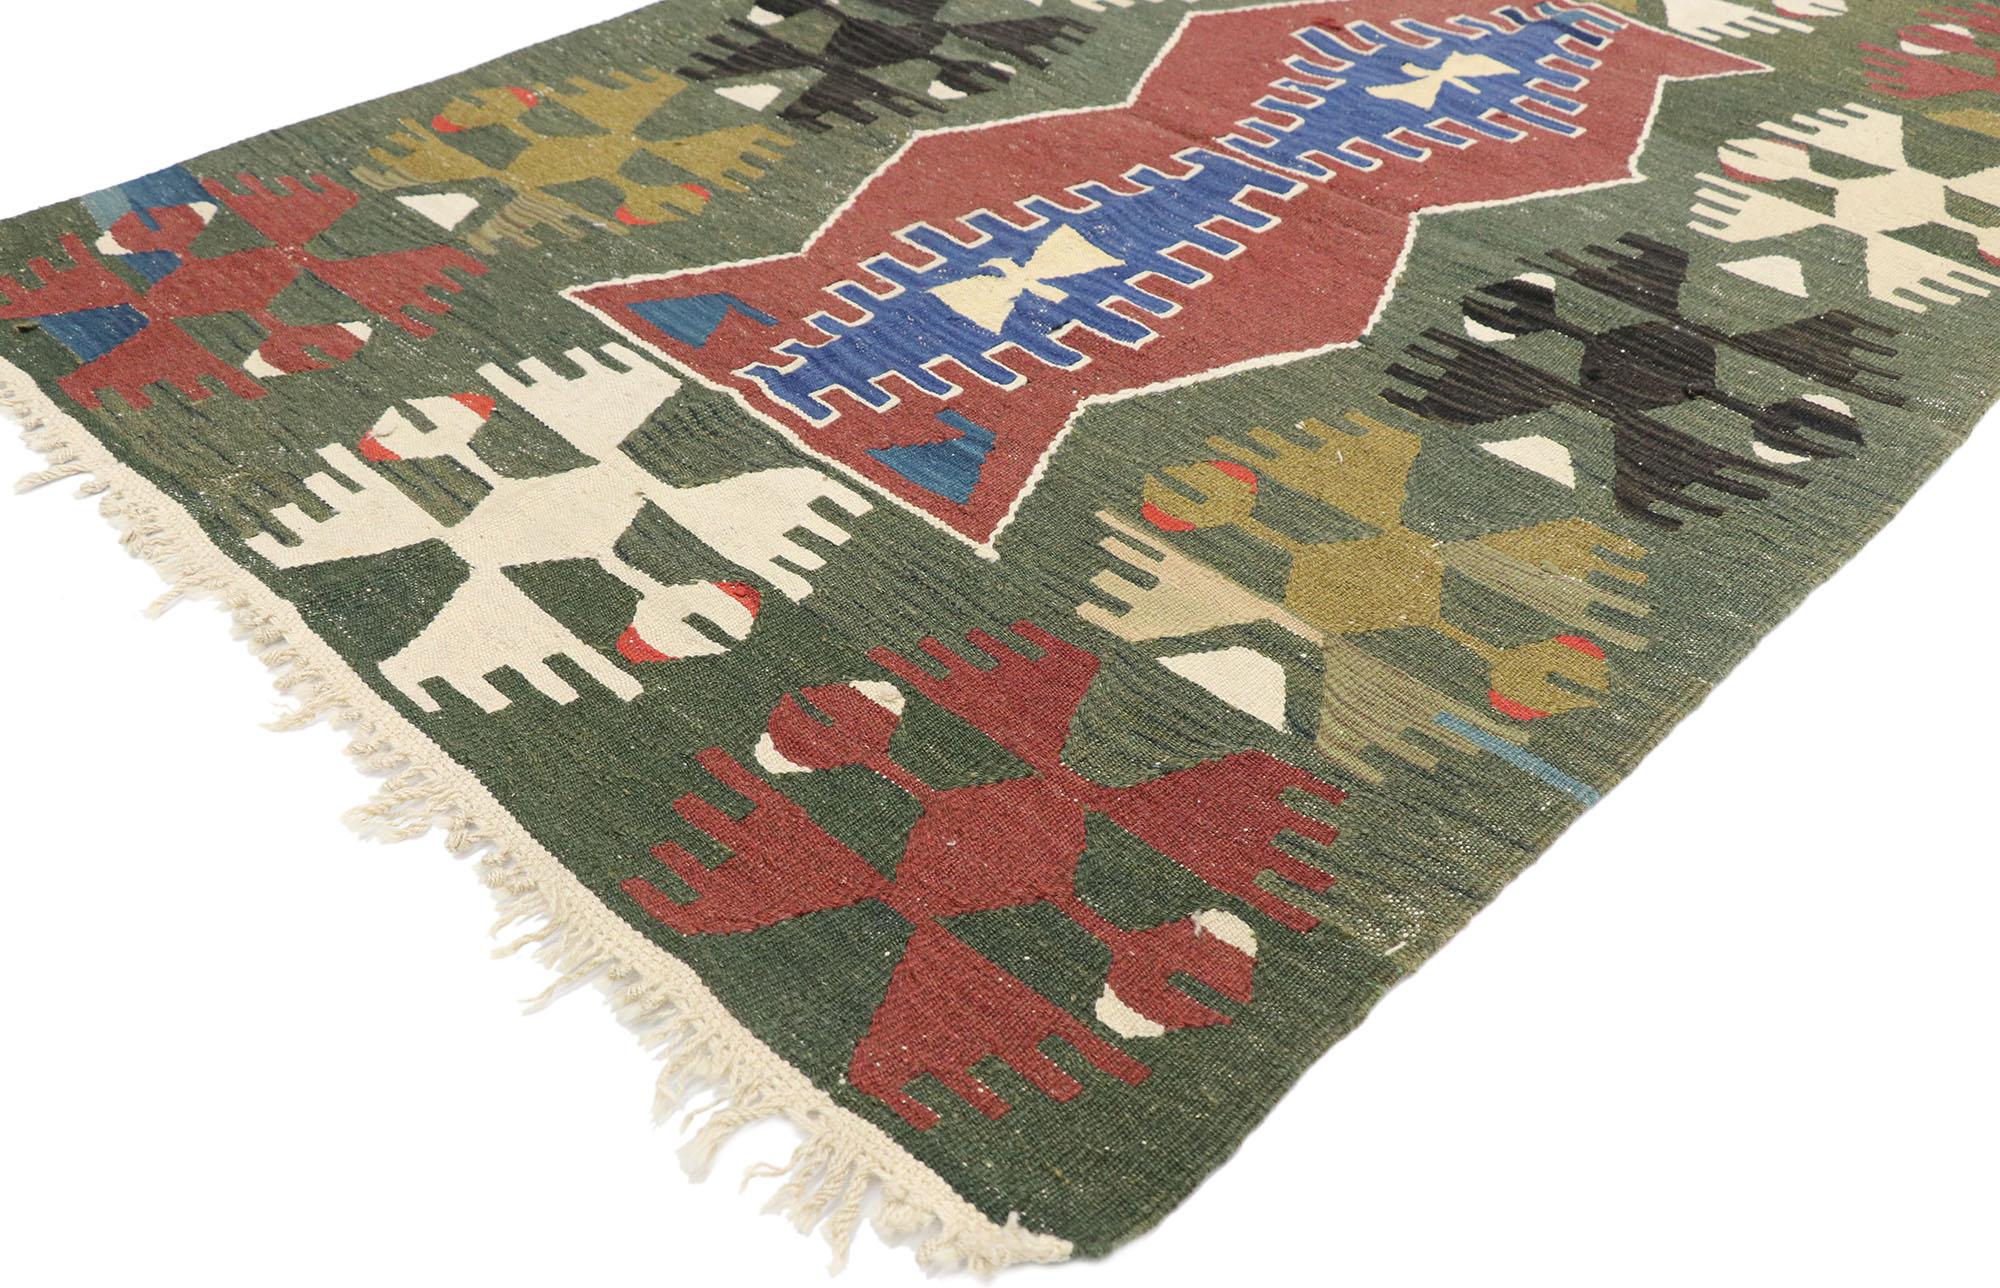 77821, vintage Persian Shiraz Kilim rug with Tribal style. Full of tiny details and a bold expressive design combined with tribal style, this hand-woven wool vintage Persian Shiraz kilim rug is a captivating vision of woven beauty. The abrashed